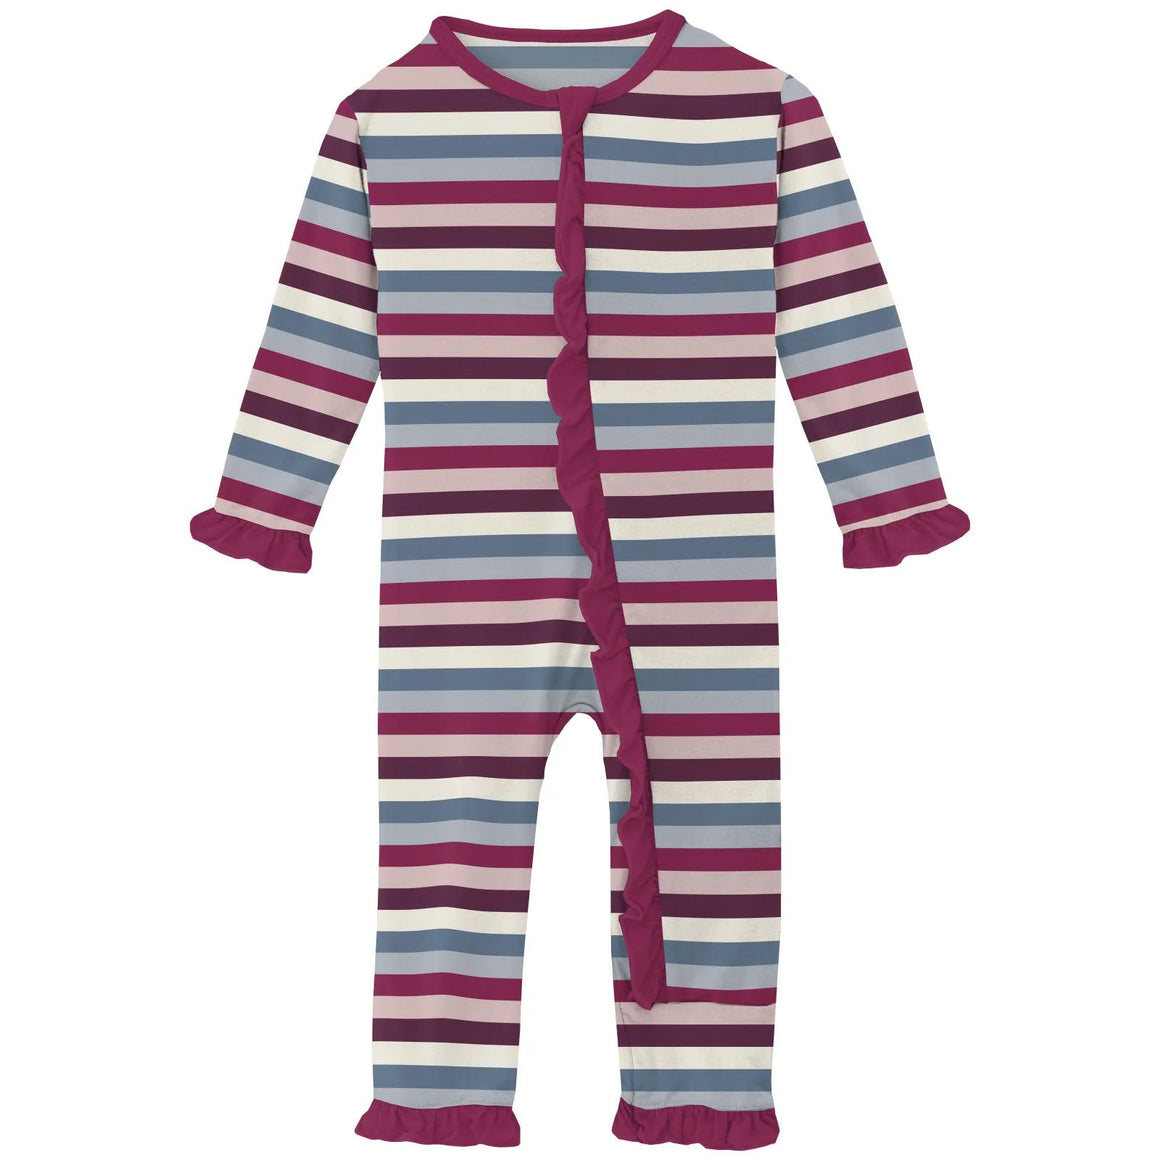 Kickee Pants Ruffle Coverall with Snaps or Zipper - Satara Home and Baby